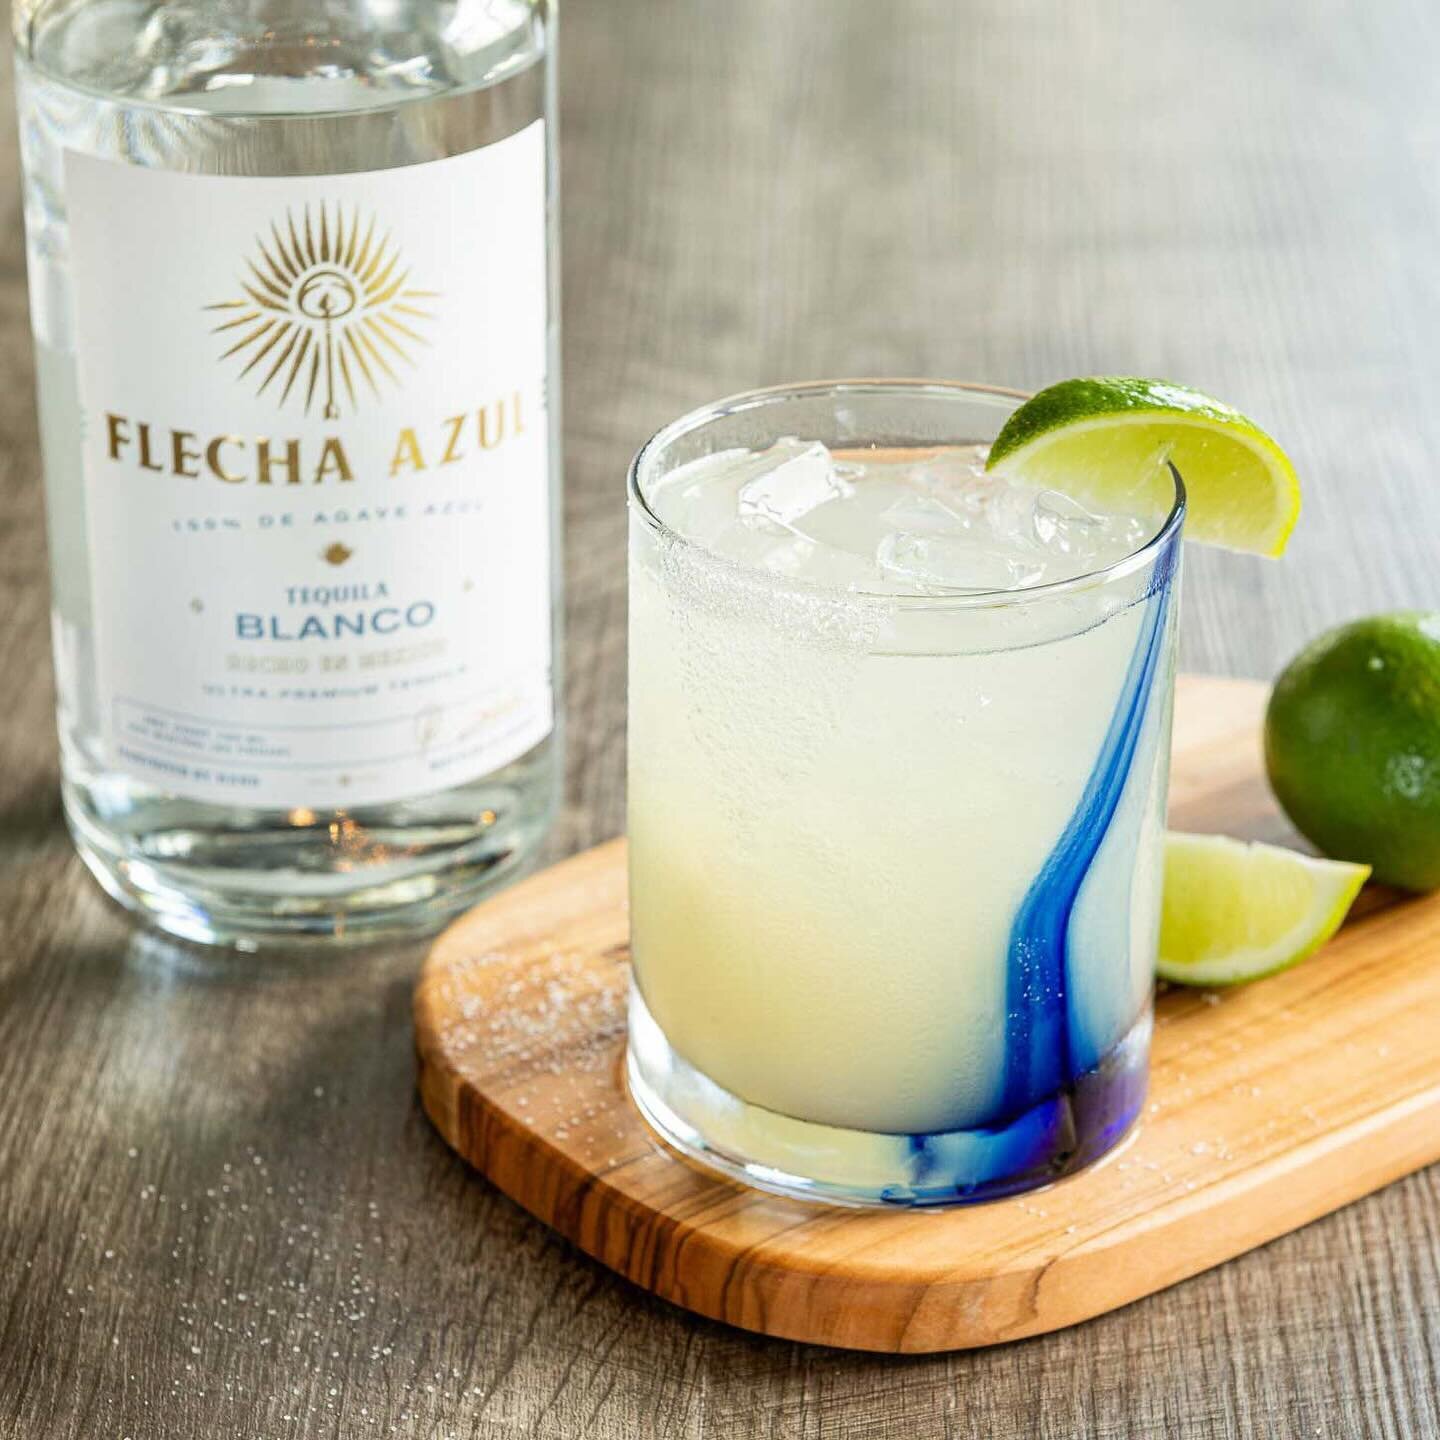 Wyd this Friday? Grabbing a few of the new Marky Margs from @ontheborder sounds like a good idea! Featuring Mark Wahlberg's Flecha Azul Blanco, this premium margarita will quickly become your go-to.

#circleeast #experiencetowson #towson #towsonmd